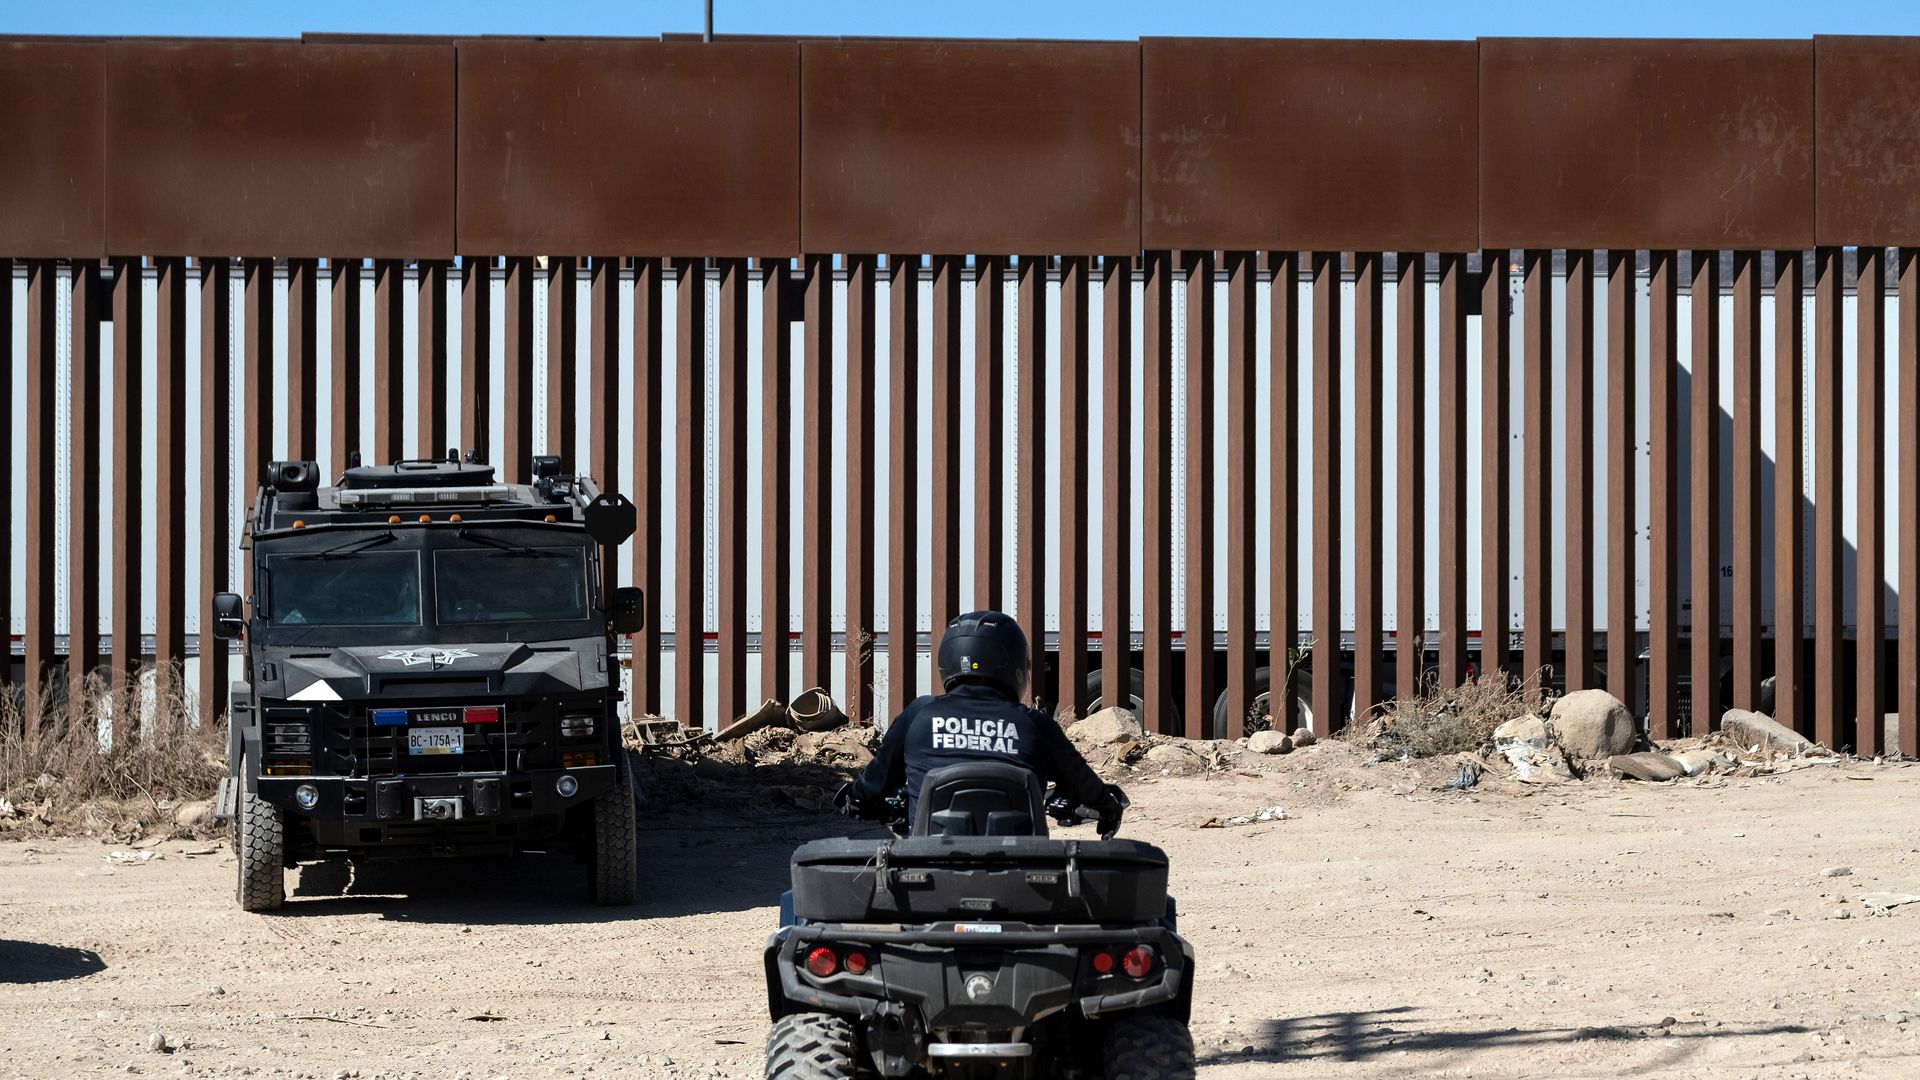 In this image, police sit in cars next to the border wall.